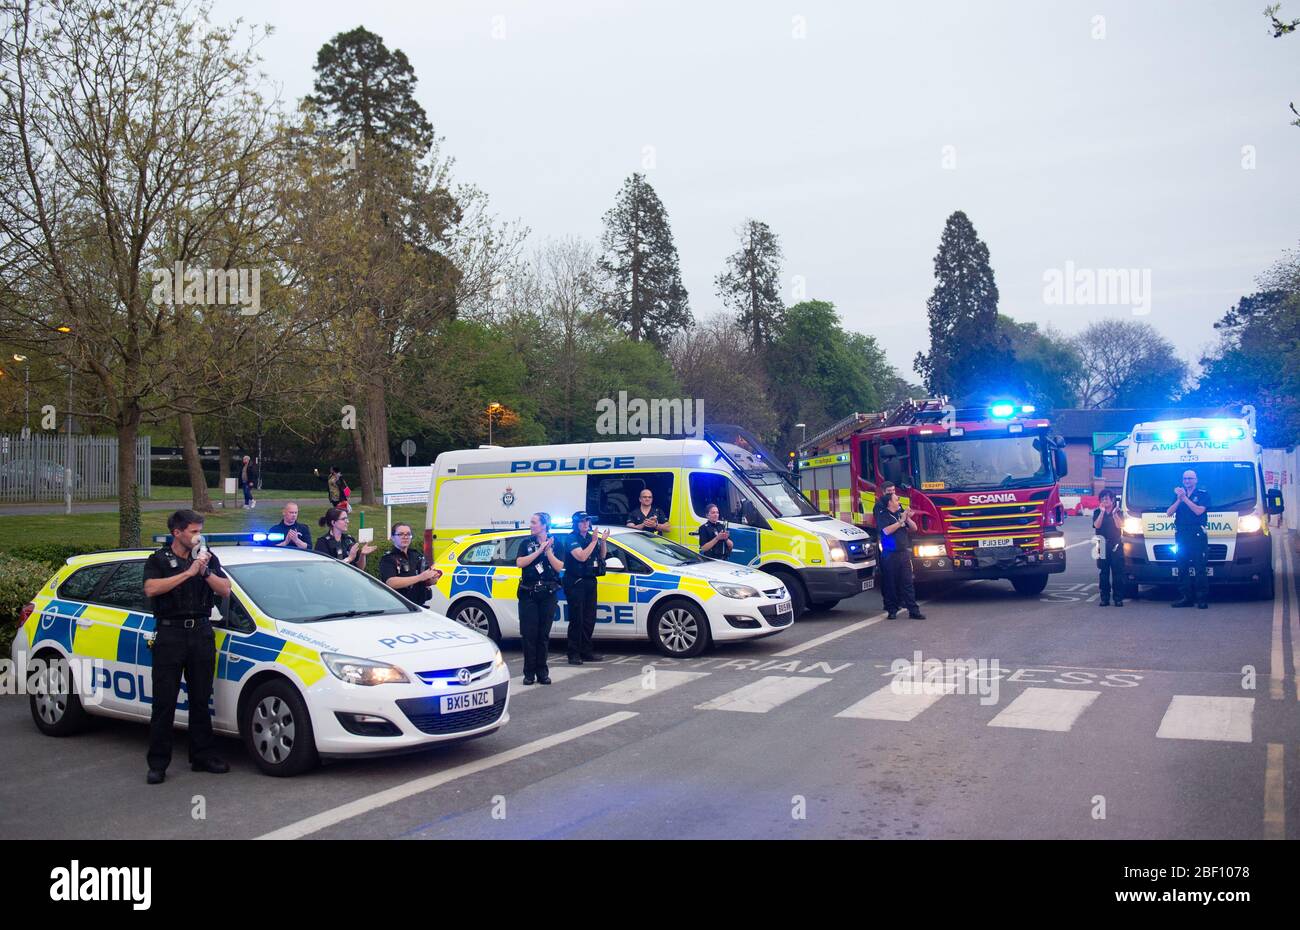 Members of the police force, fire service and paramedics join the applause outside Glenfield Hospital in Leicester, to salute local heroes during Thursday's nationwide Clap for Carers NHS initiative to applaud NHS workers and carers fighting the coronavirus pandemic. Stock Photo